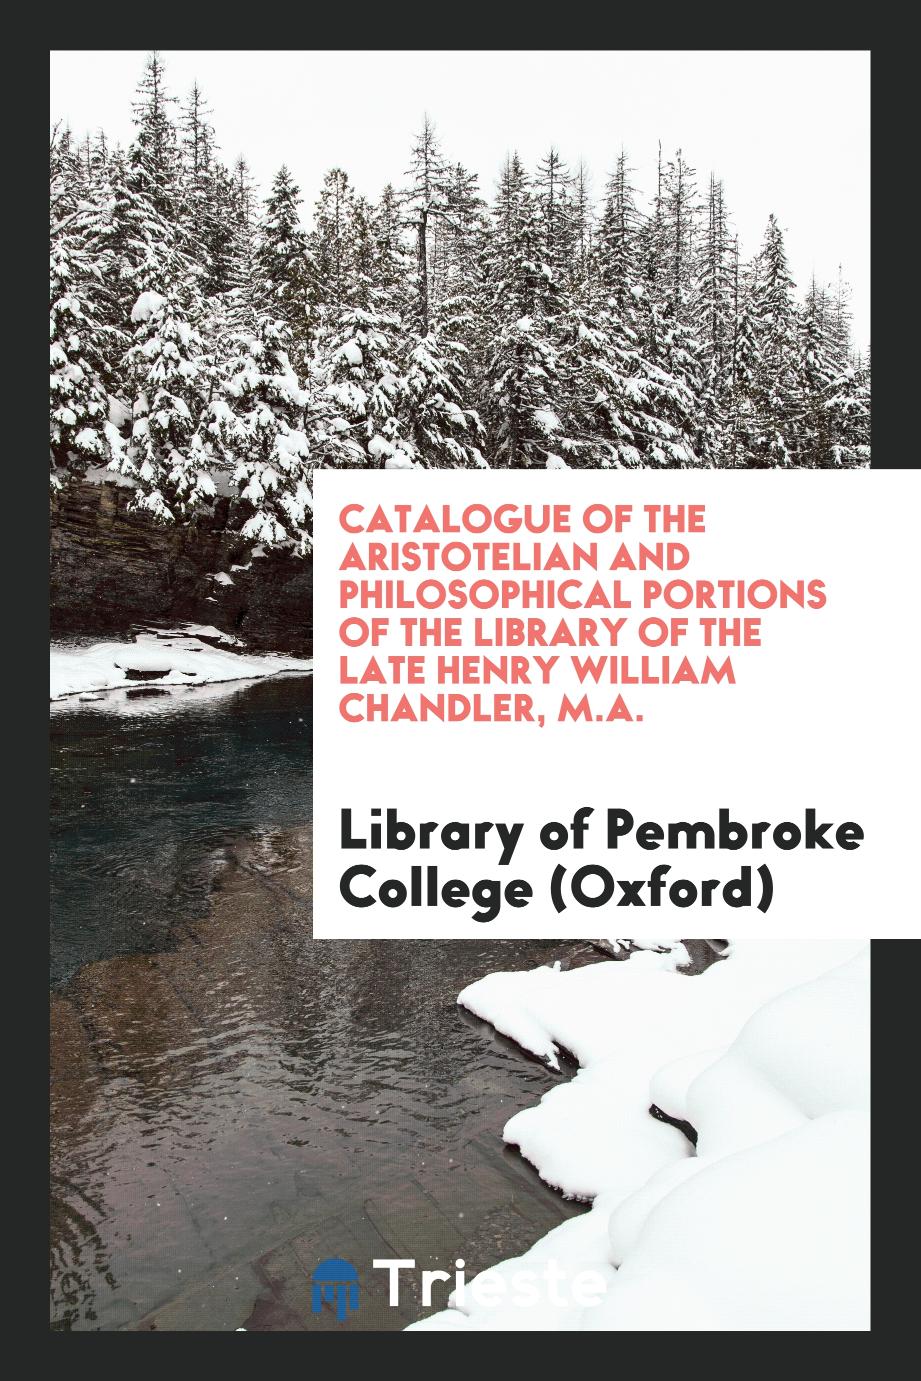 Library of Pembroke College (Oxford) - Catalogue of the Aristotelian and Philosophical Portions of the Library of the Late Henry William Chandler, M.A.